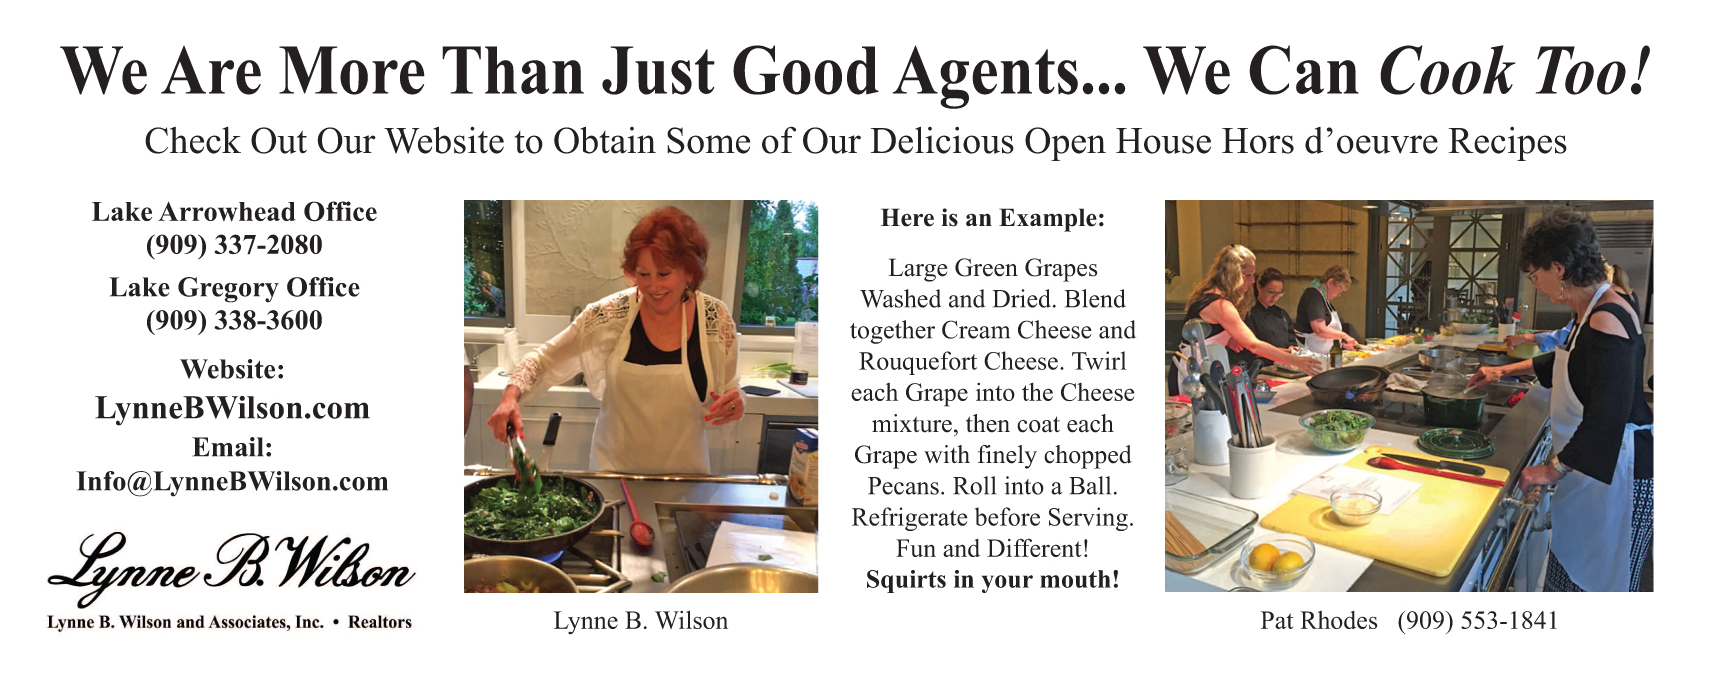 Lake Arrowhead Realtors do more than sell real estate- they can cook too!